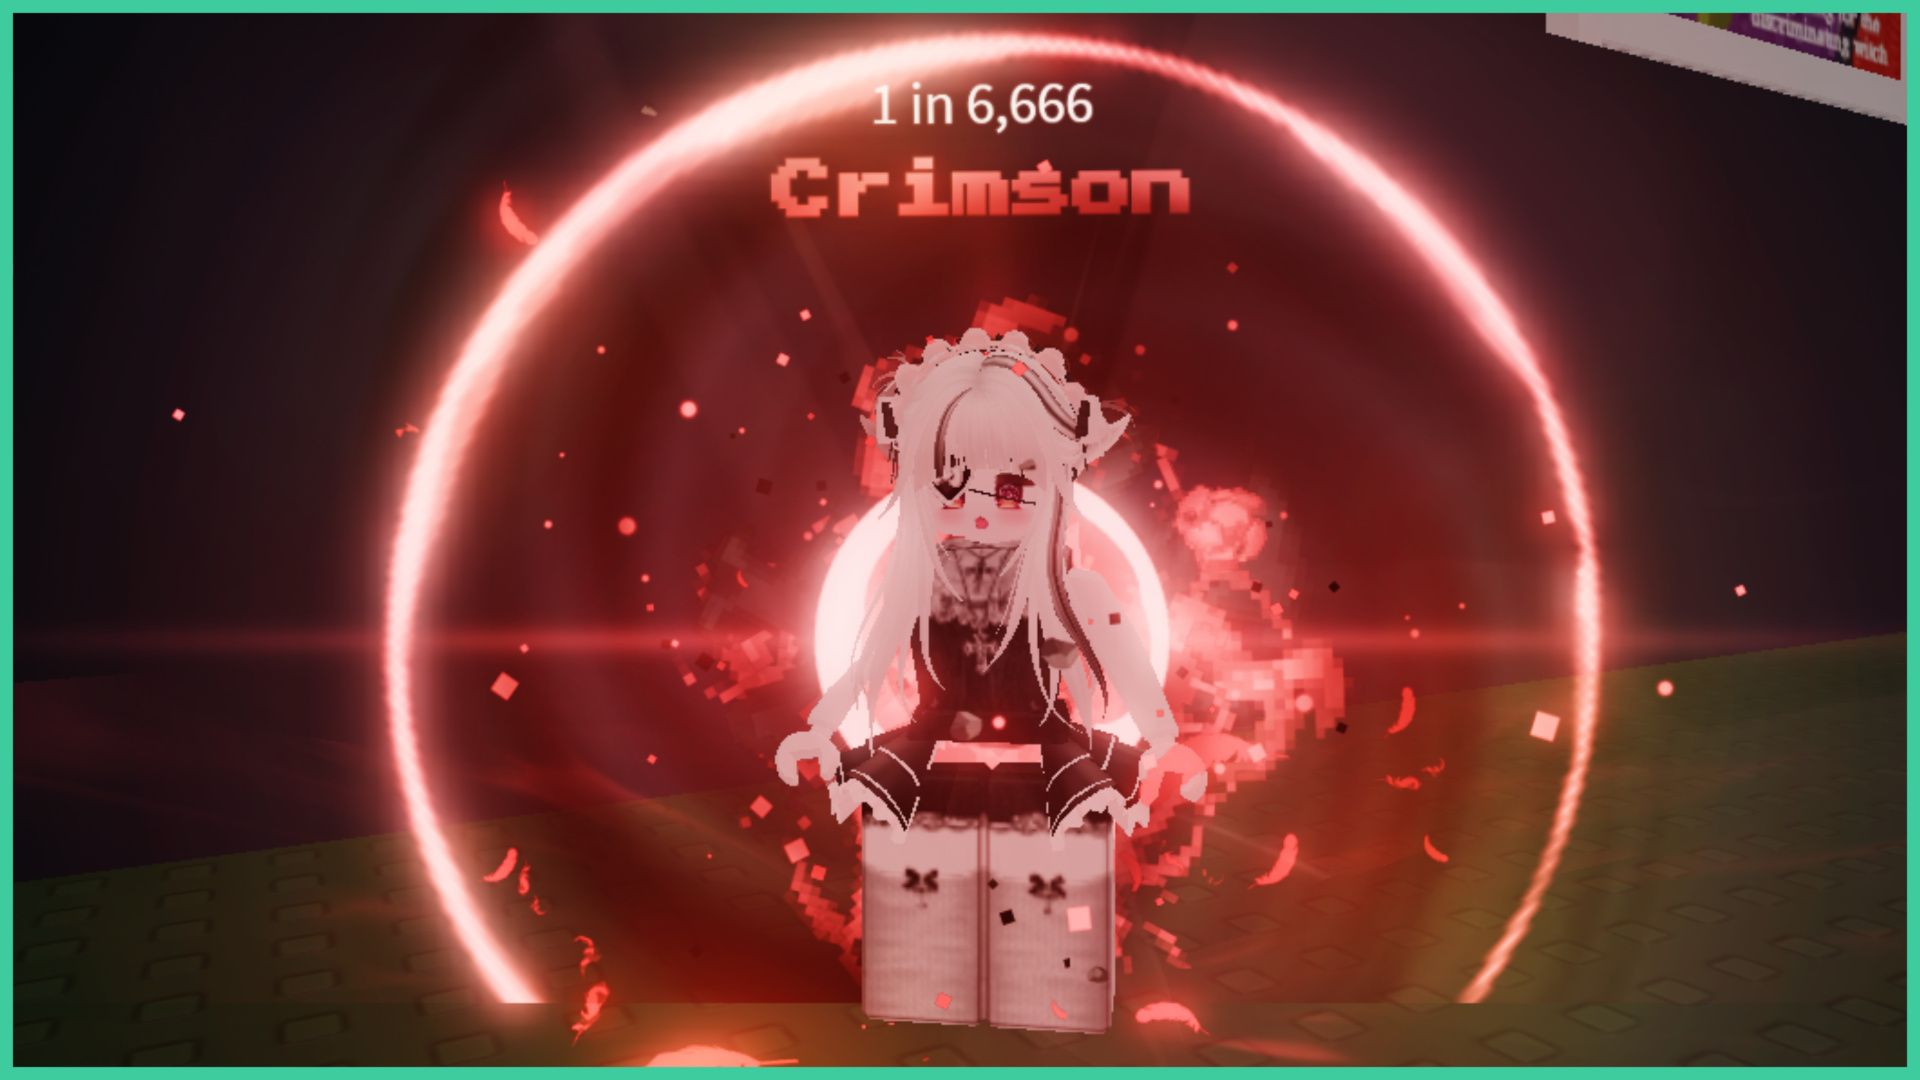 feature image for our hade's rng combat guide, the roblox player has the crimson aura equipped, with the word 'crimson' in a red pixelated font and '1 in 6,666' above it, the aura has a glowing red ring around the avatar, with pixelated smoke, and red and black debris flying around